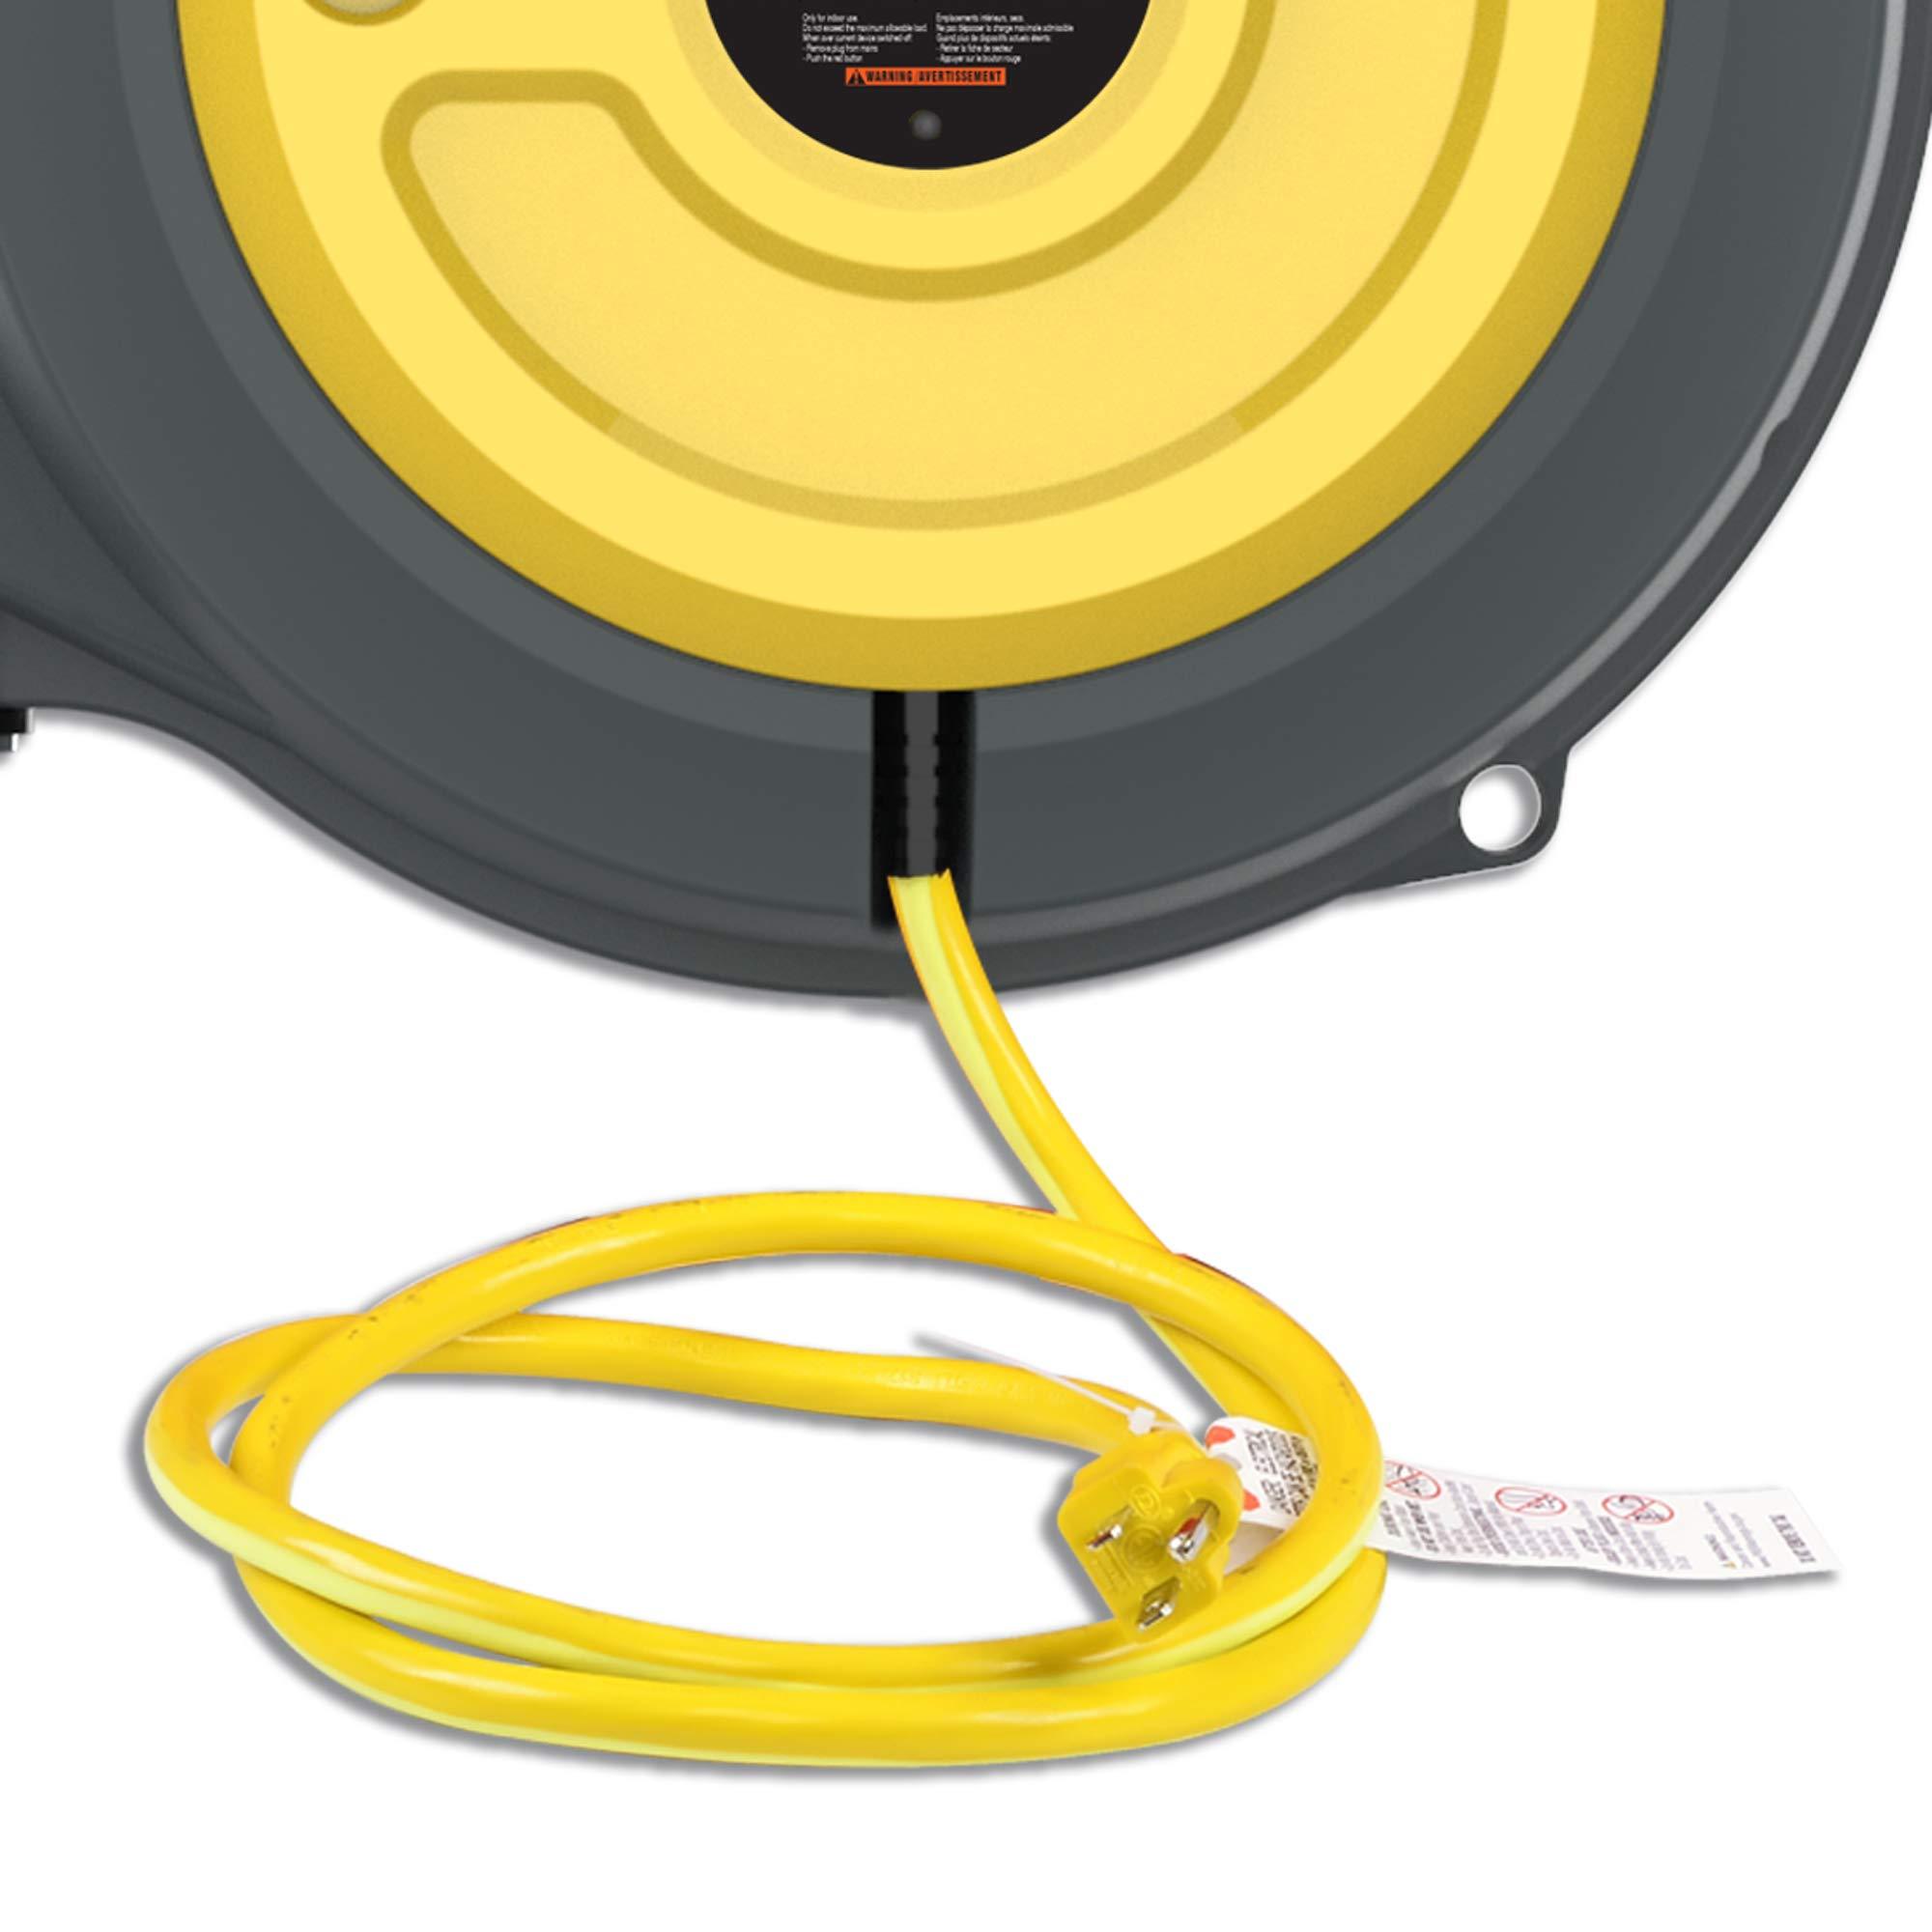 ReelWorks Extension Cord Reel Retractable 12AWG x 50' Foot 3C/SJTOW Glow  Strip Cable and Lightup Triple Tap Connector Advanced Slow Retraction